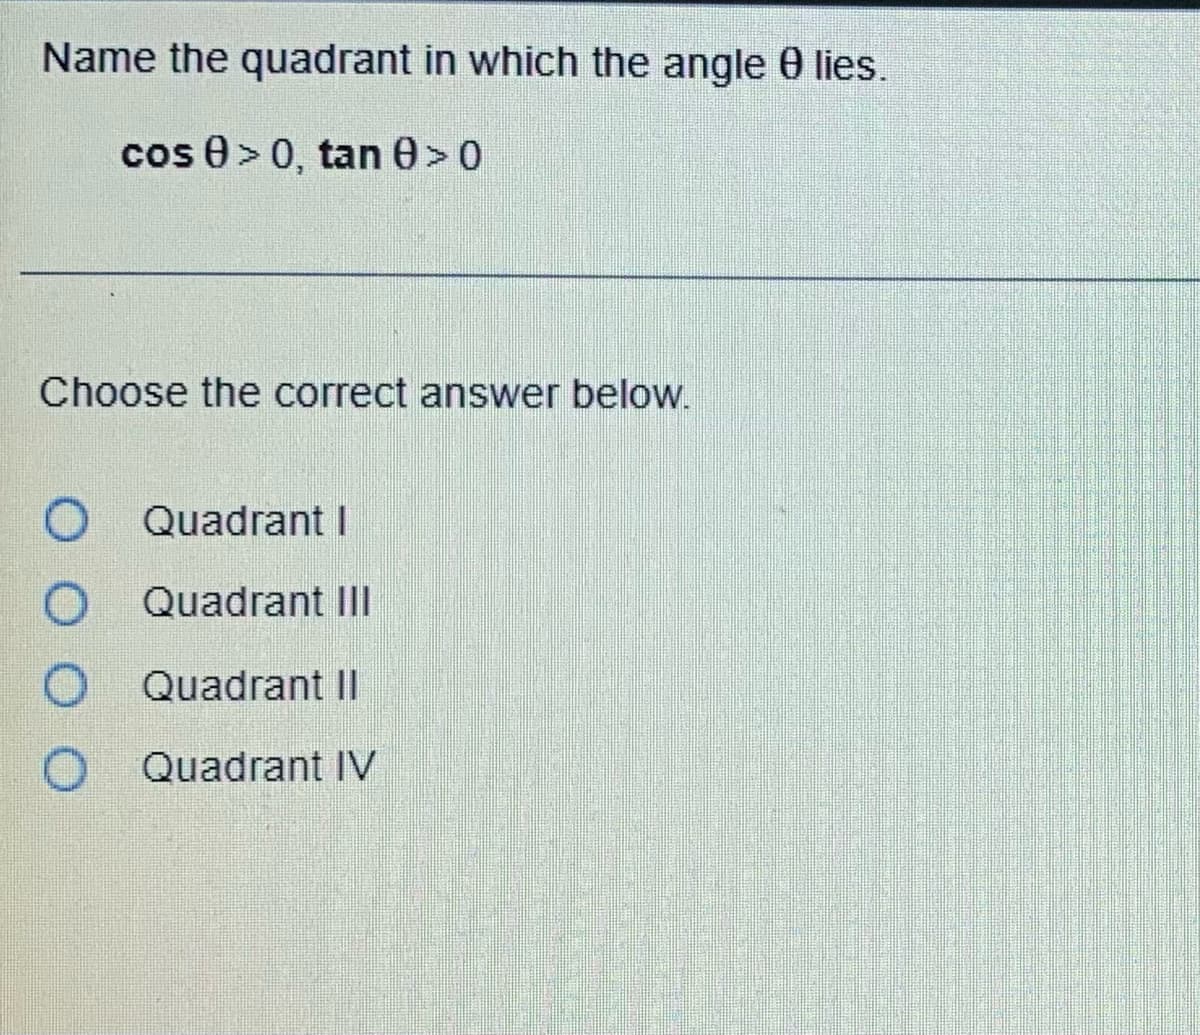 Name the quadrant in which the angle 8 lies.
cos 0 > 0, tan 0 >0
Choose the correct answer below.
O
Quadrant I
Quadrant III
Quadrant Il
O Quadrant IV